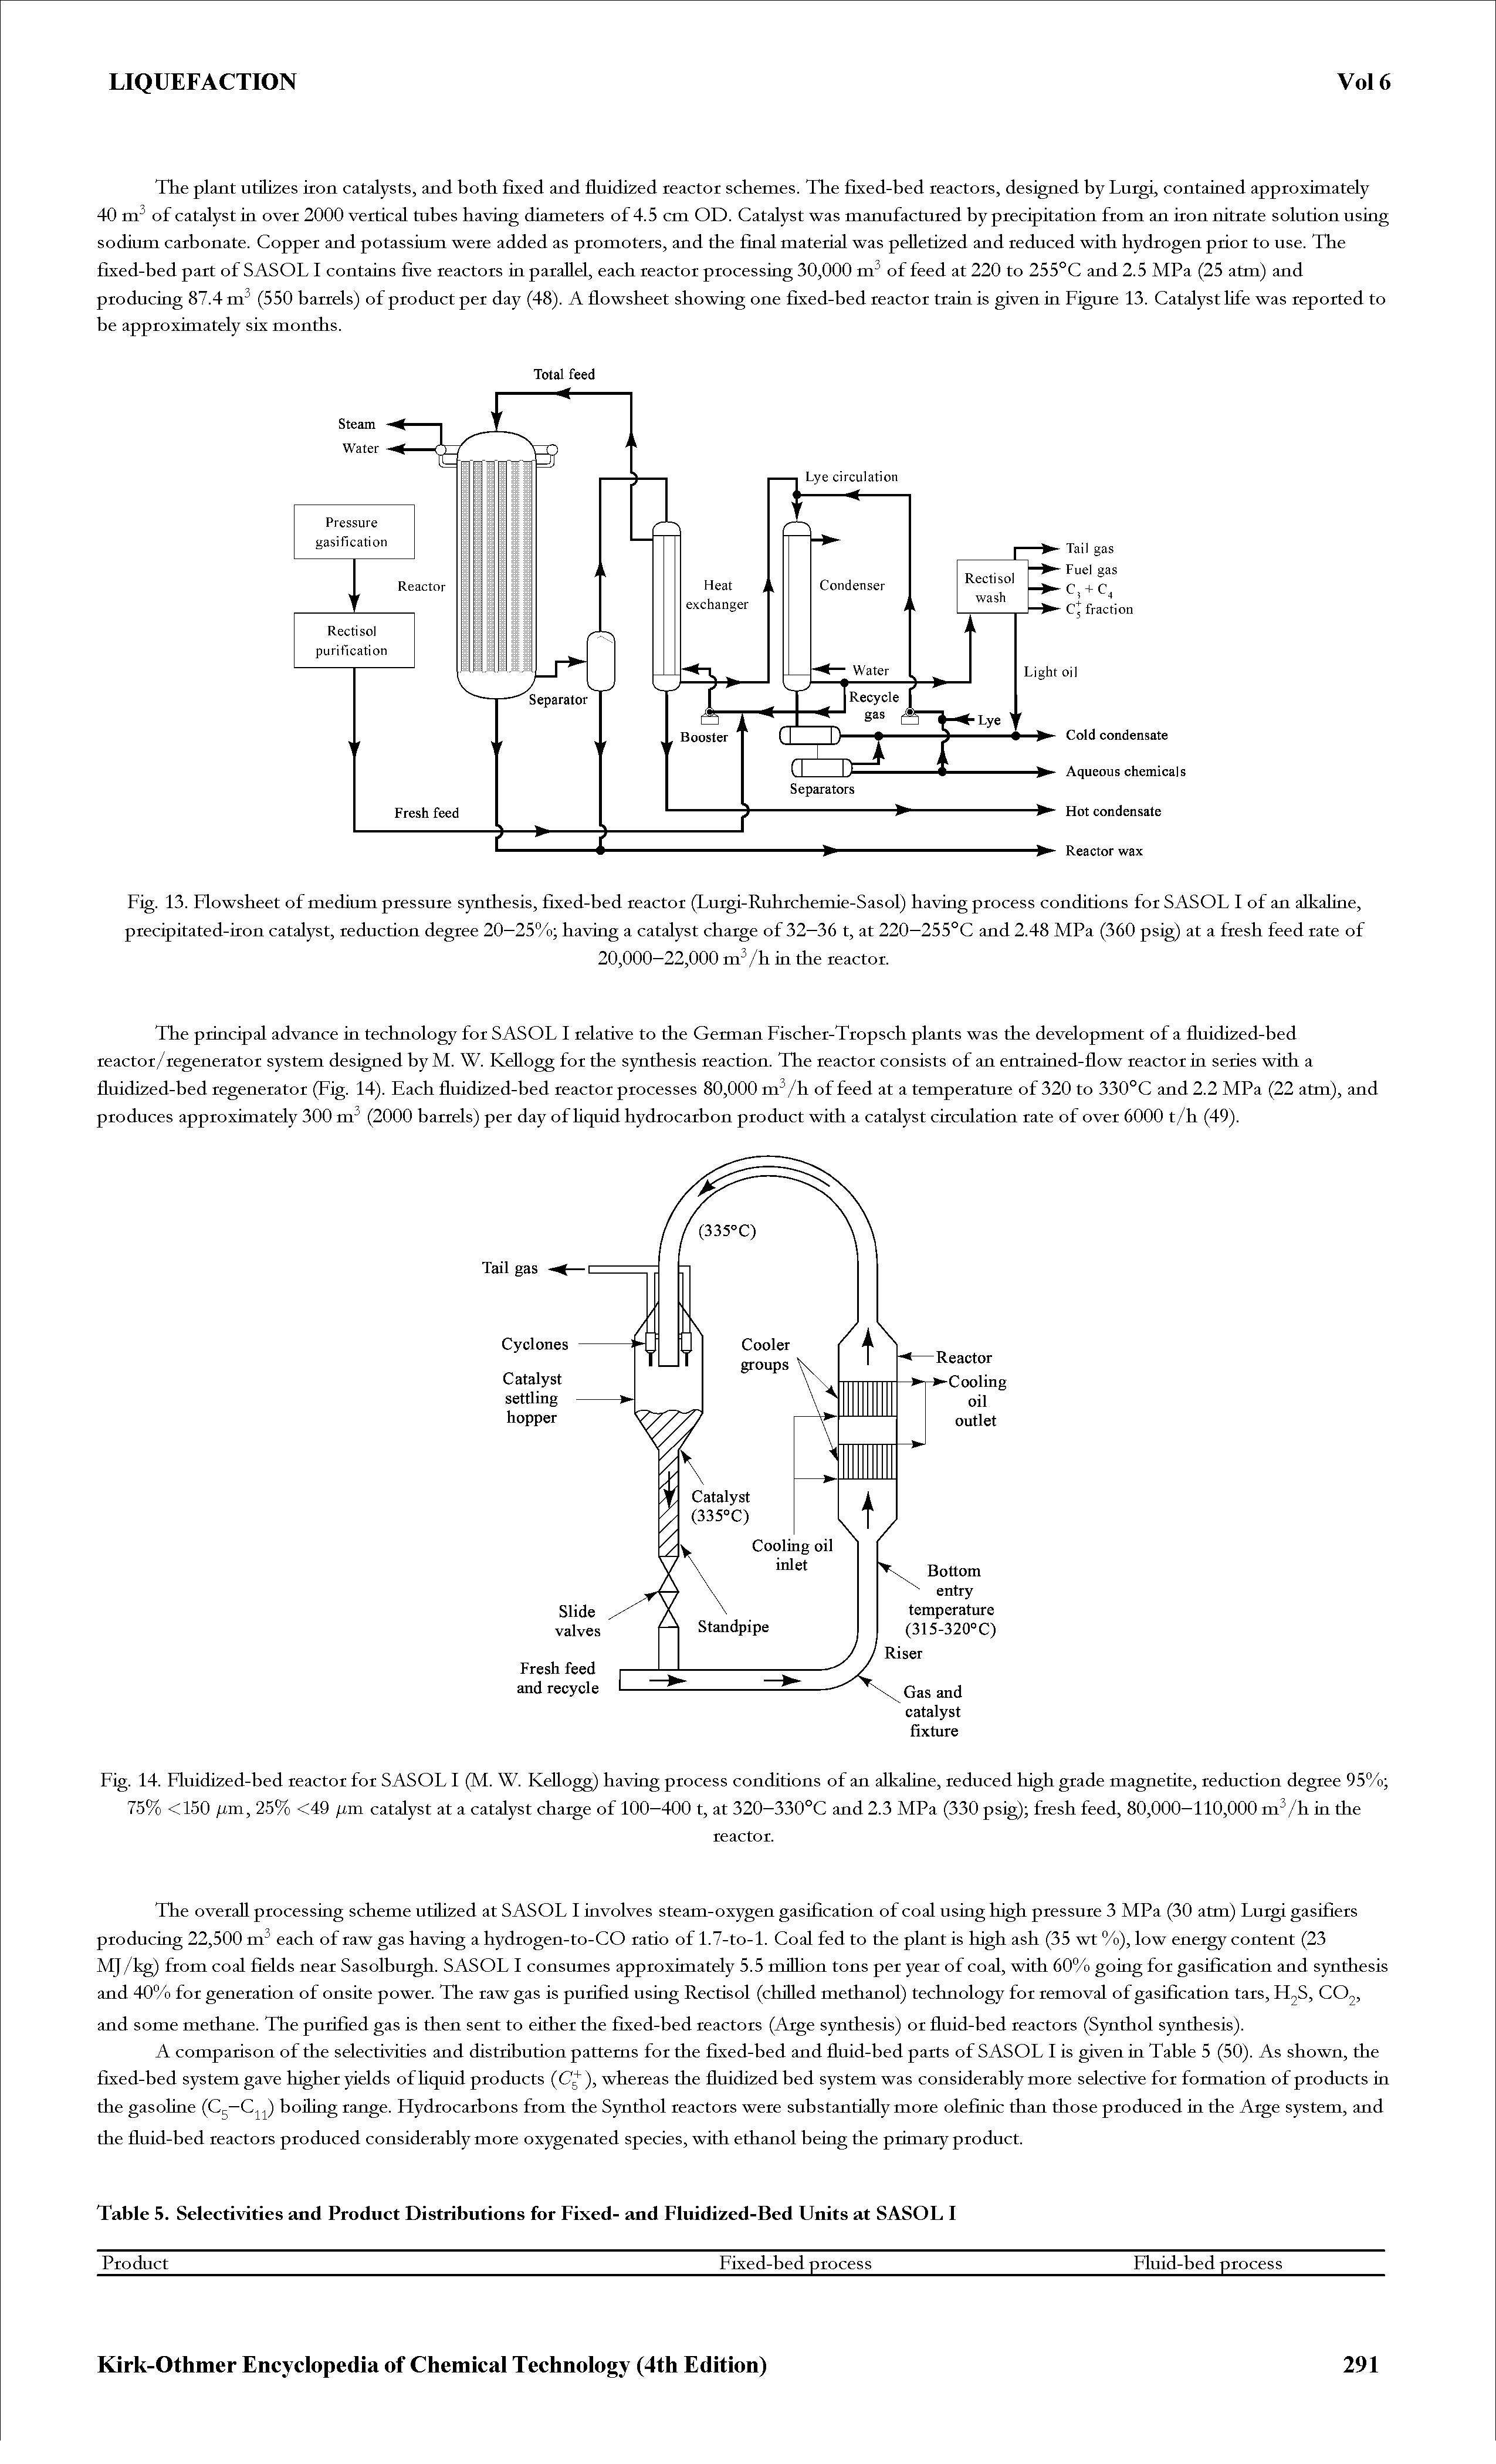 Fig. 13. Flowsheet of medium pressure synthesis, fixed-bed reactor (Lurgi-Ruhrchemie-Sasol) having process conditions for SASOL I of an alkaline, precipitated-iron catalyst, reduction degree 20—25% having a catalyst charge of 32—36 t, at 220—255°C and 2.48 MPa (360 psig) at a fresh feed rate of...